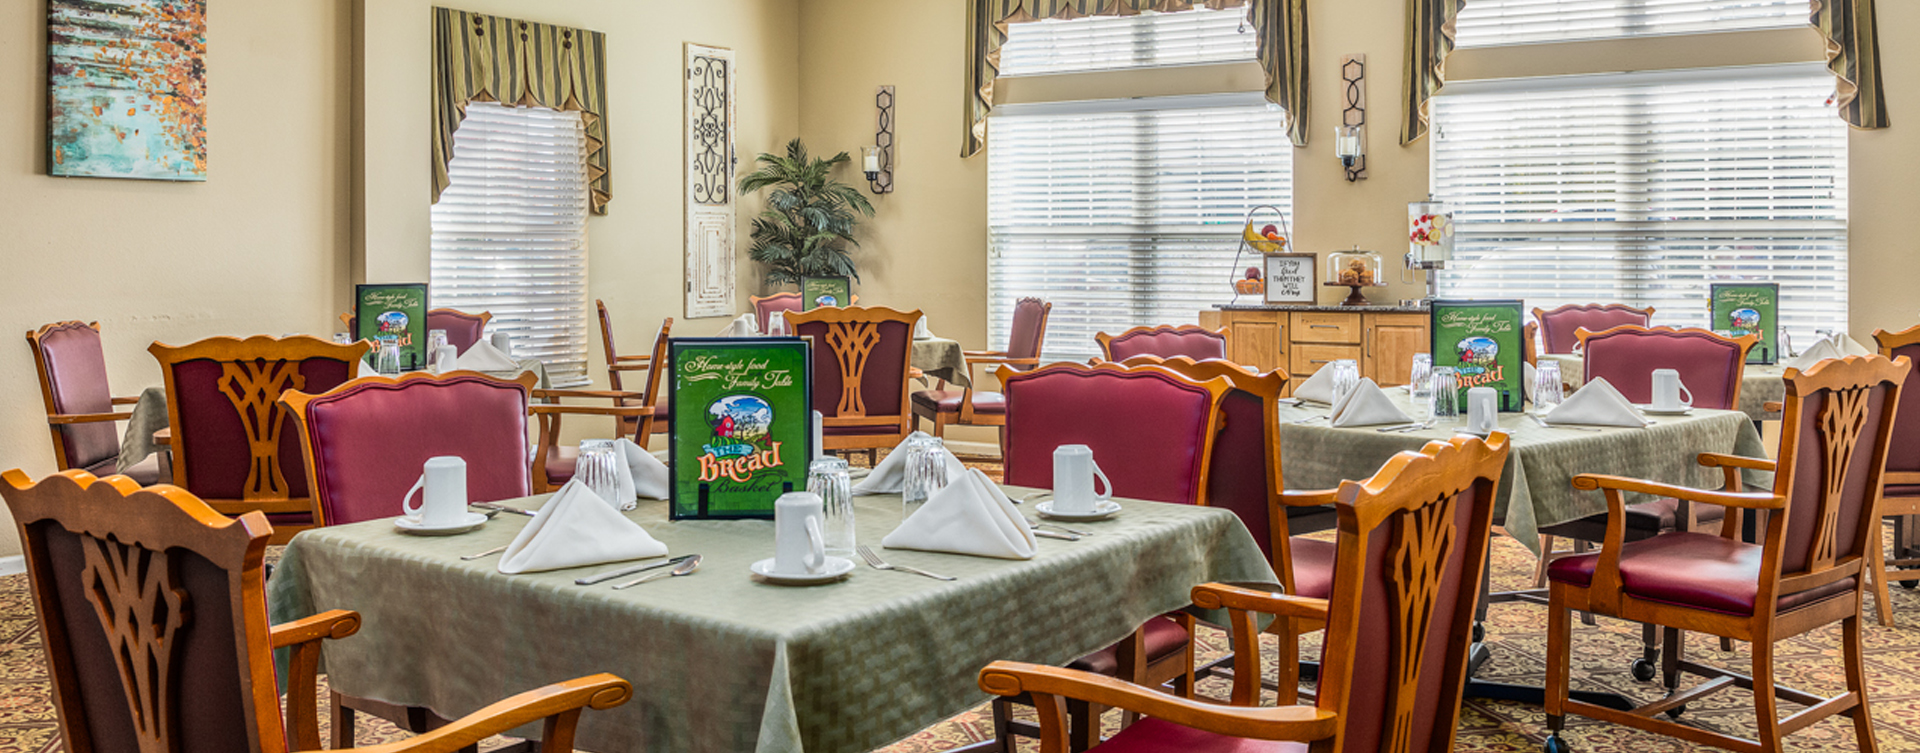 Enjoy homestyle food with made-from-scratch recipes in our dining room at Bickford of Fort Dodge